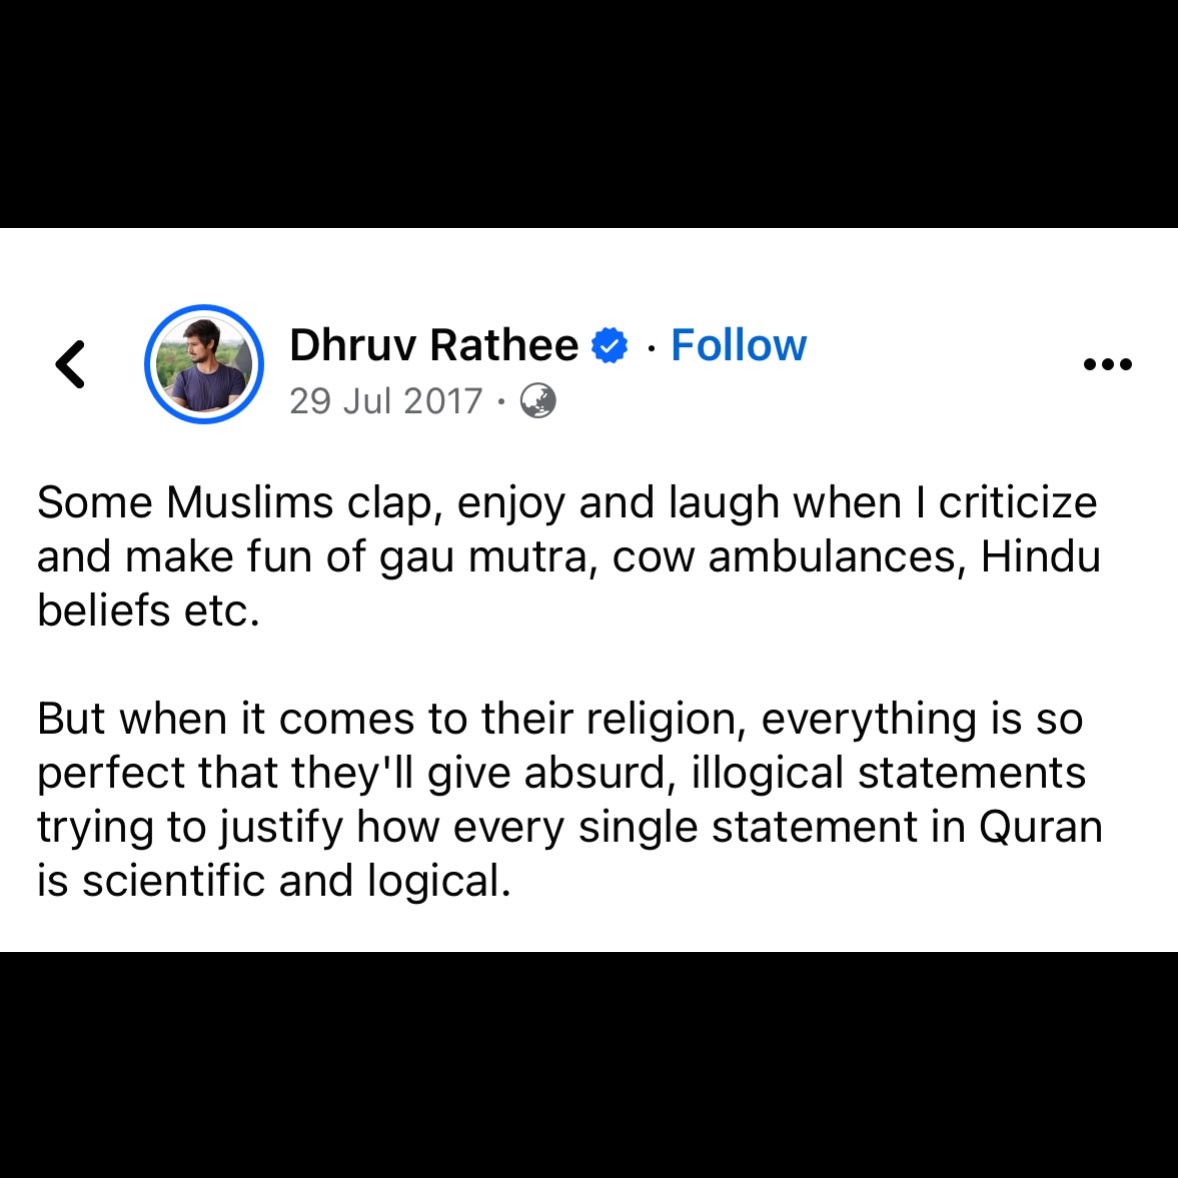 Quran is not scientific and logical says Dhruv Rathee.